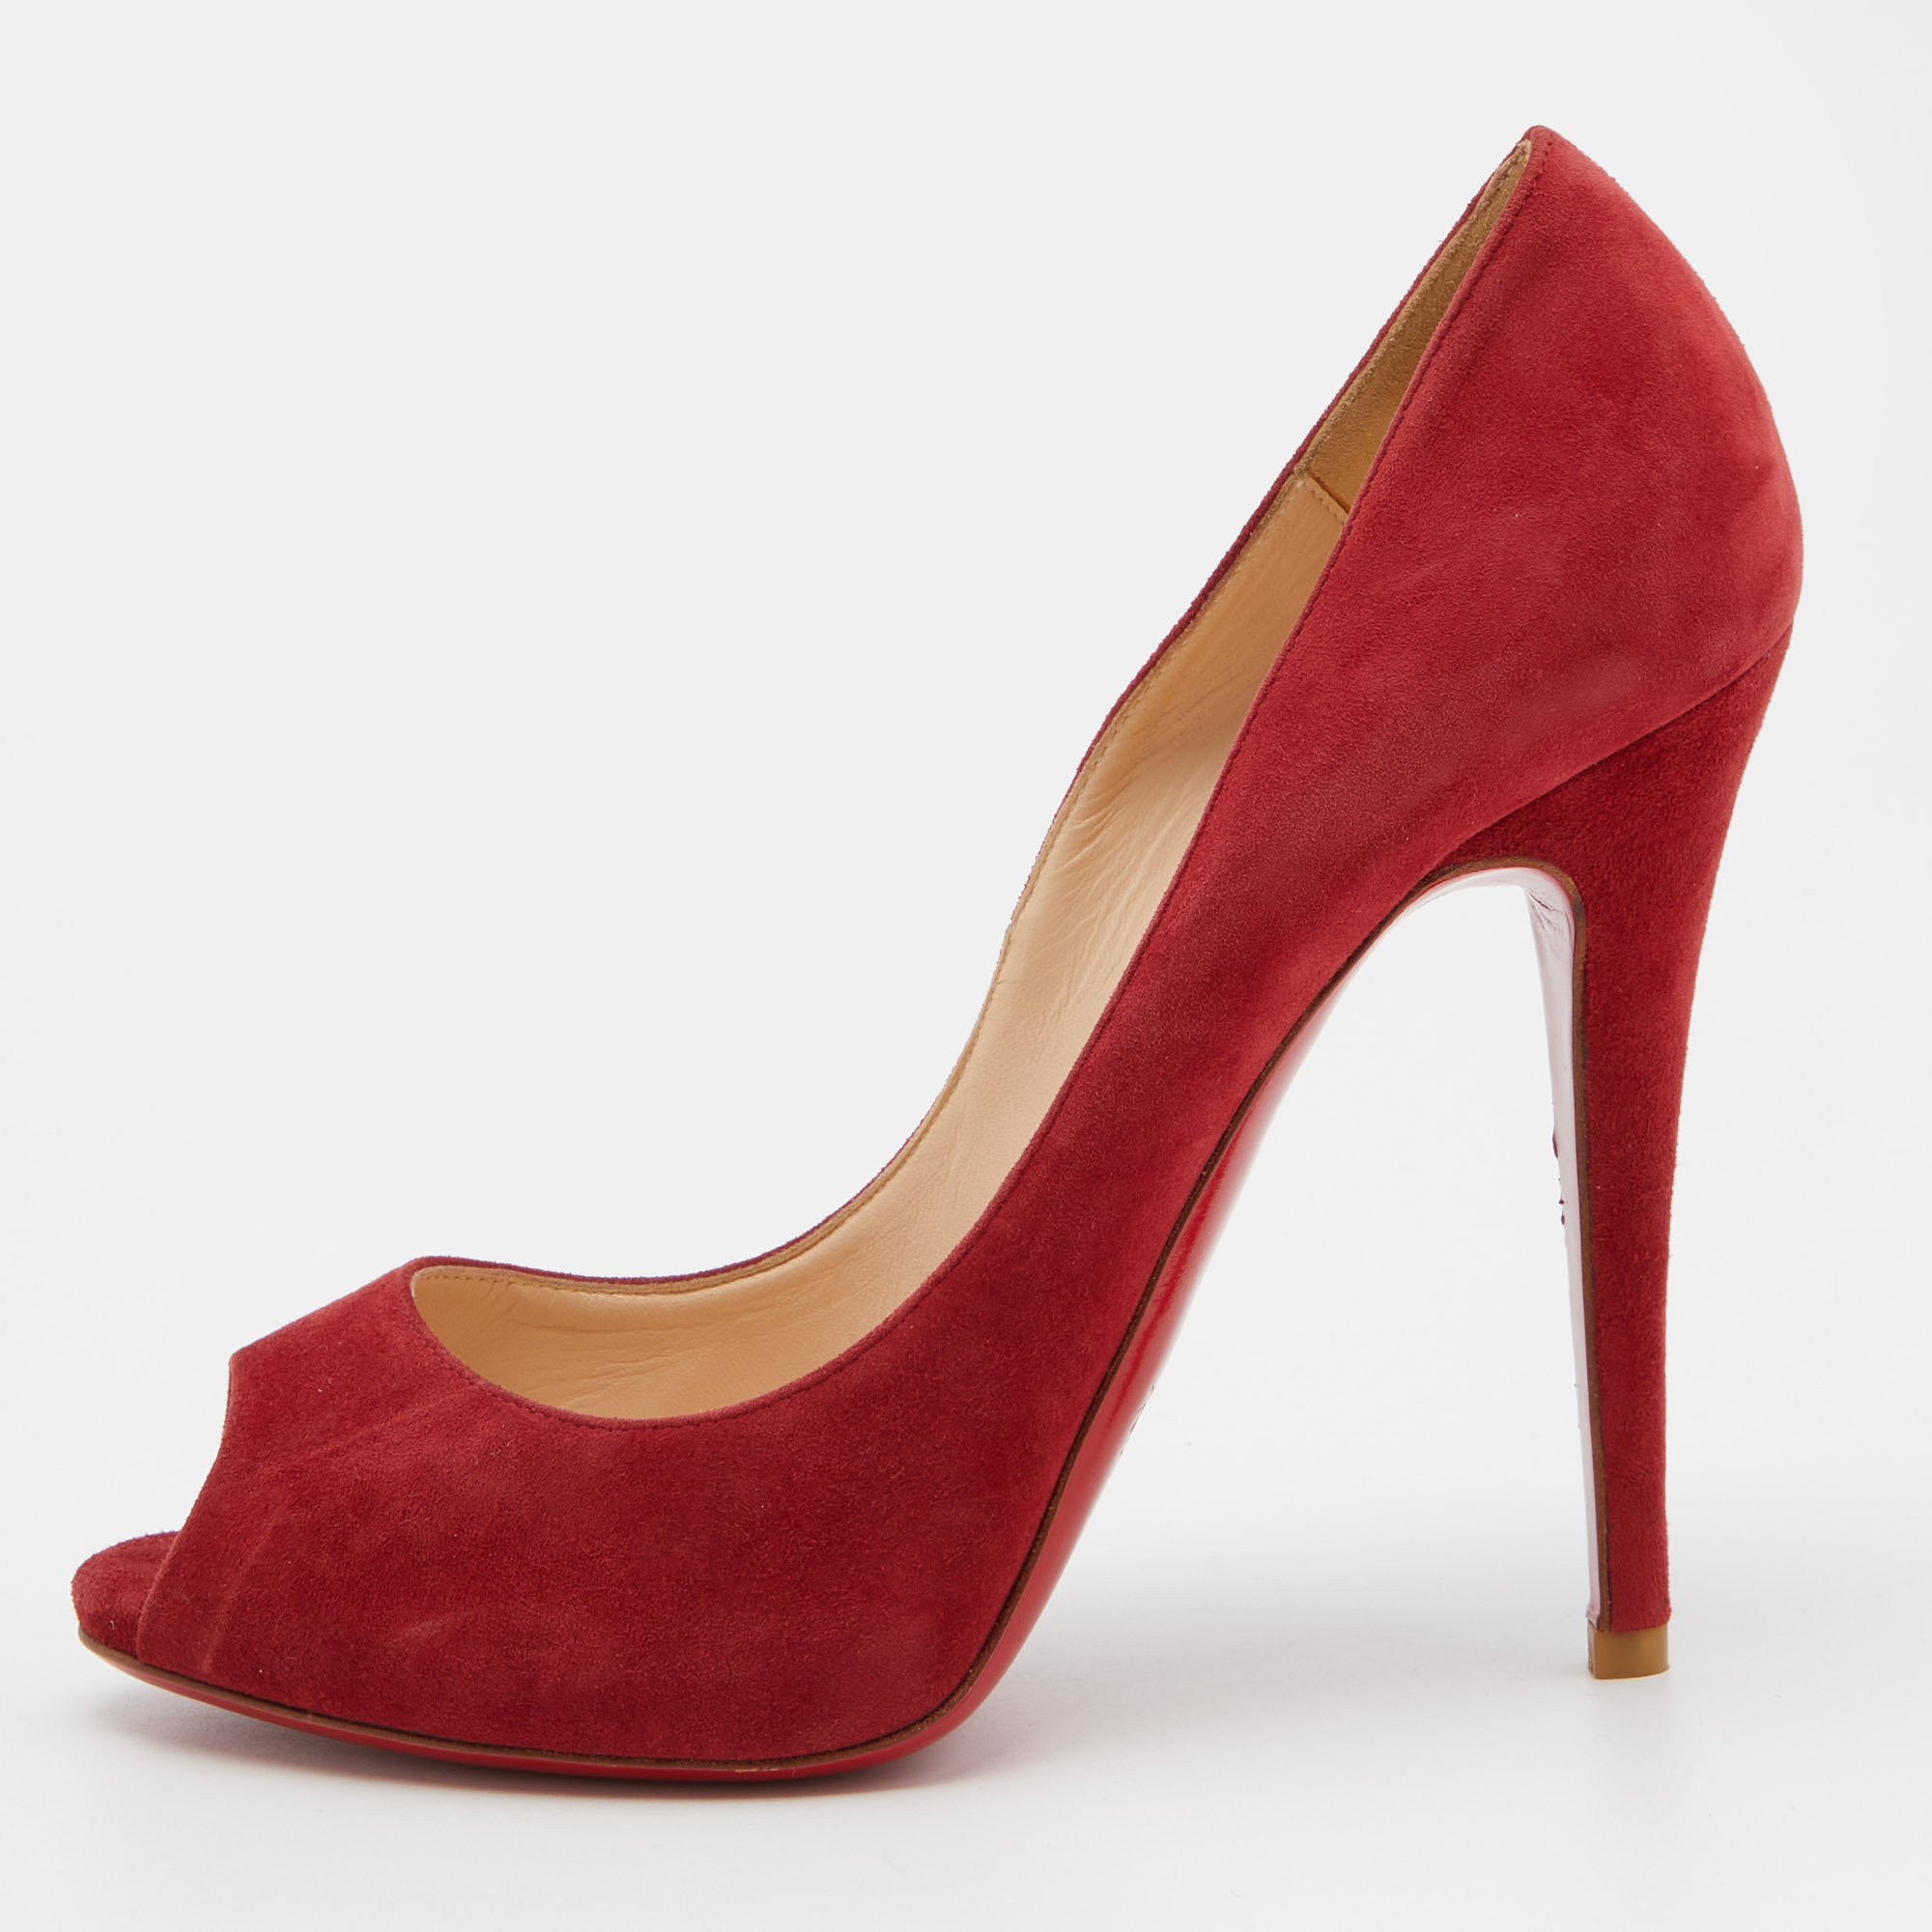 Pre-owned Christian Louboutin Red Suede Hyper Prive Peep Toe Platform Pumps Size 38.5